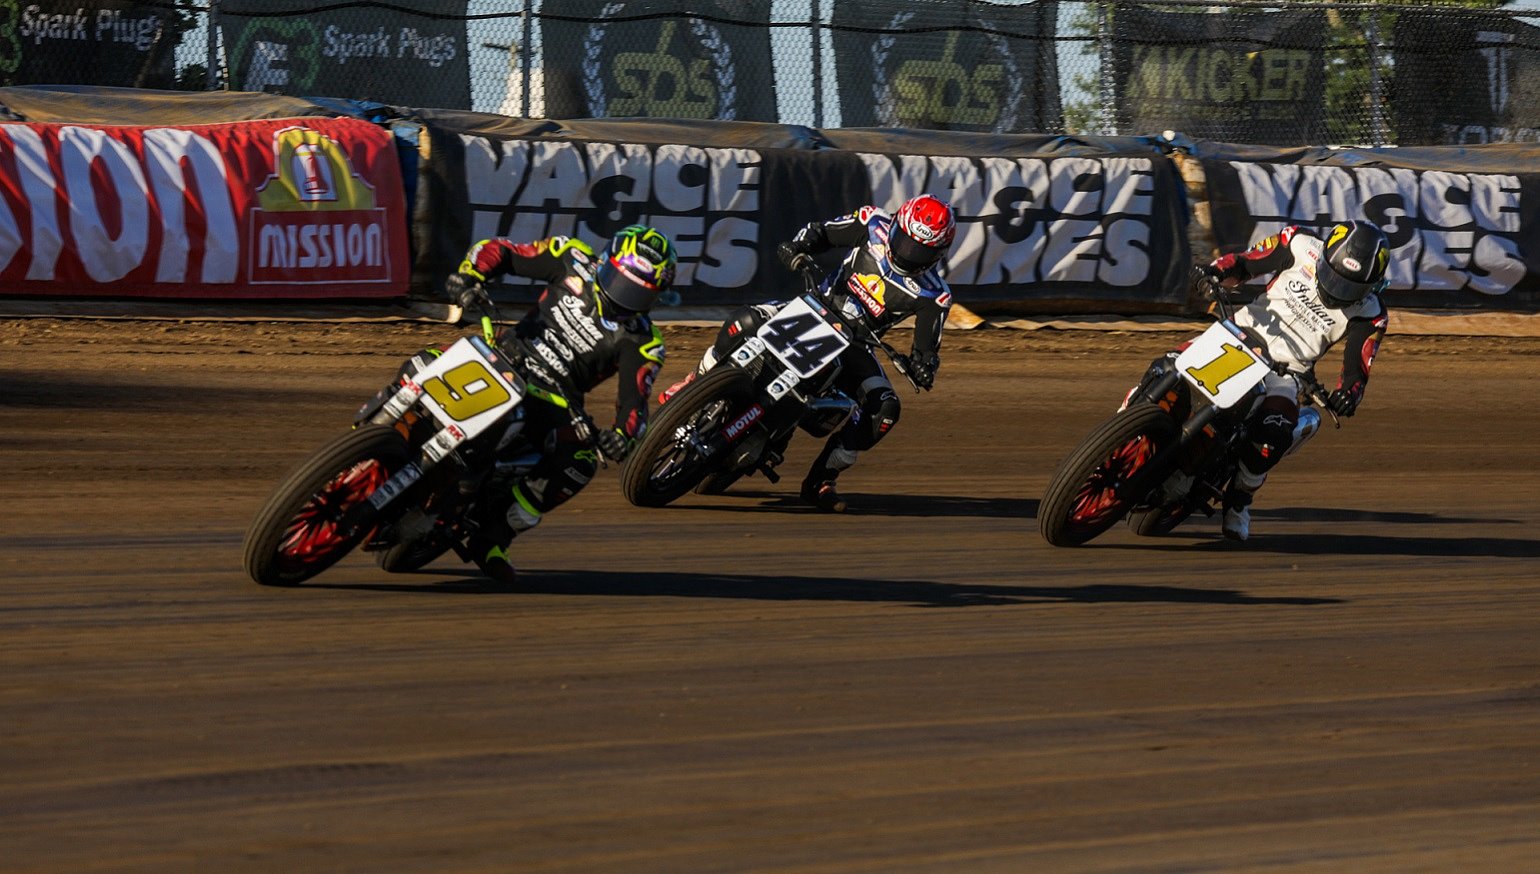 A view of Jared Mees and Briar Bauman fighting for the trophy